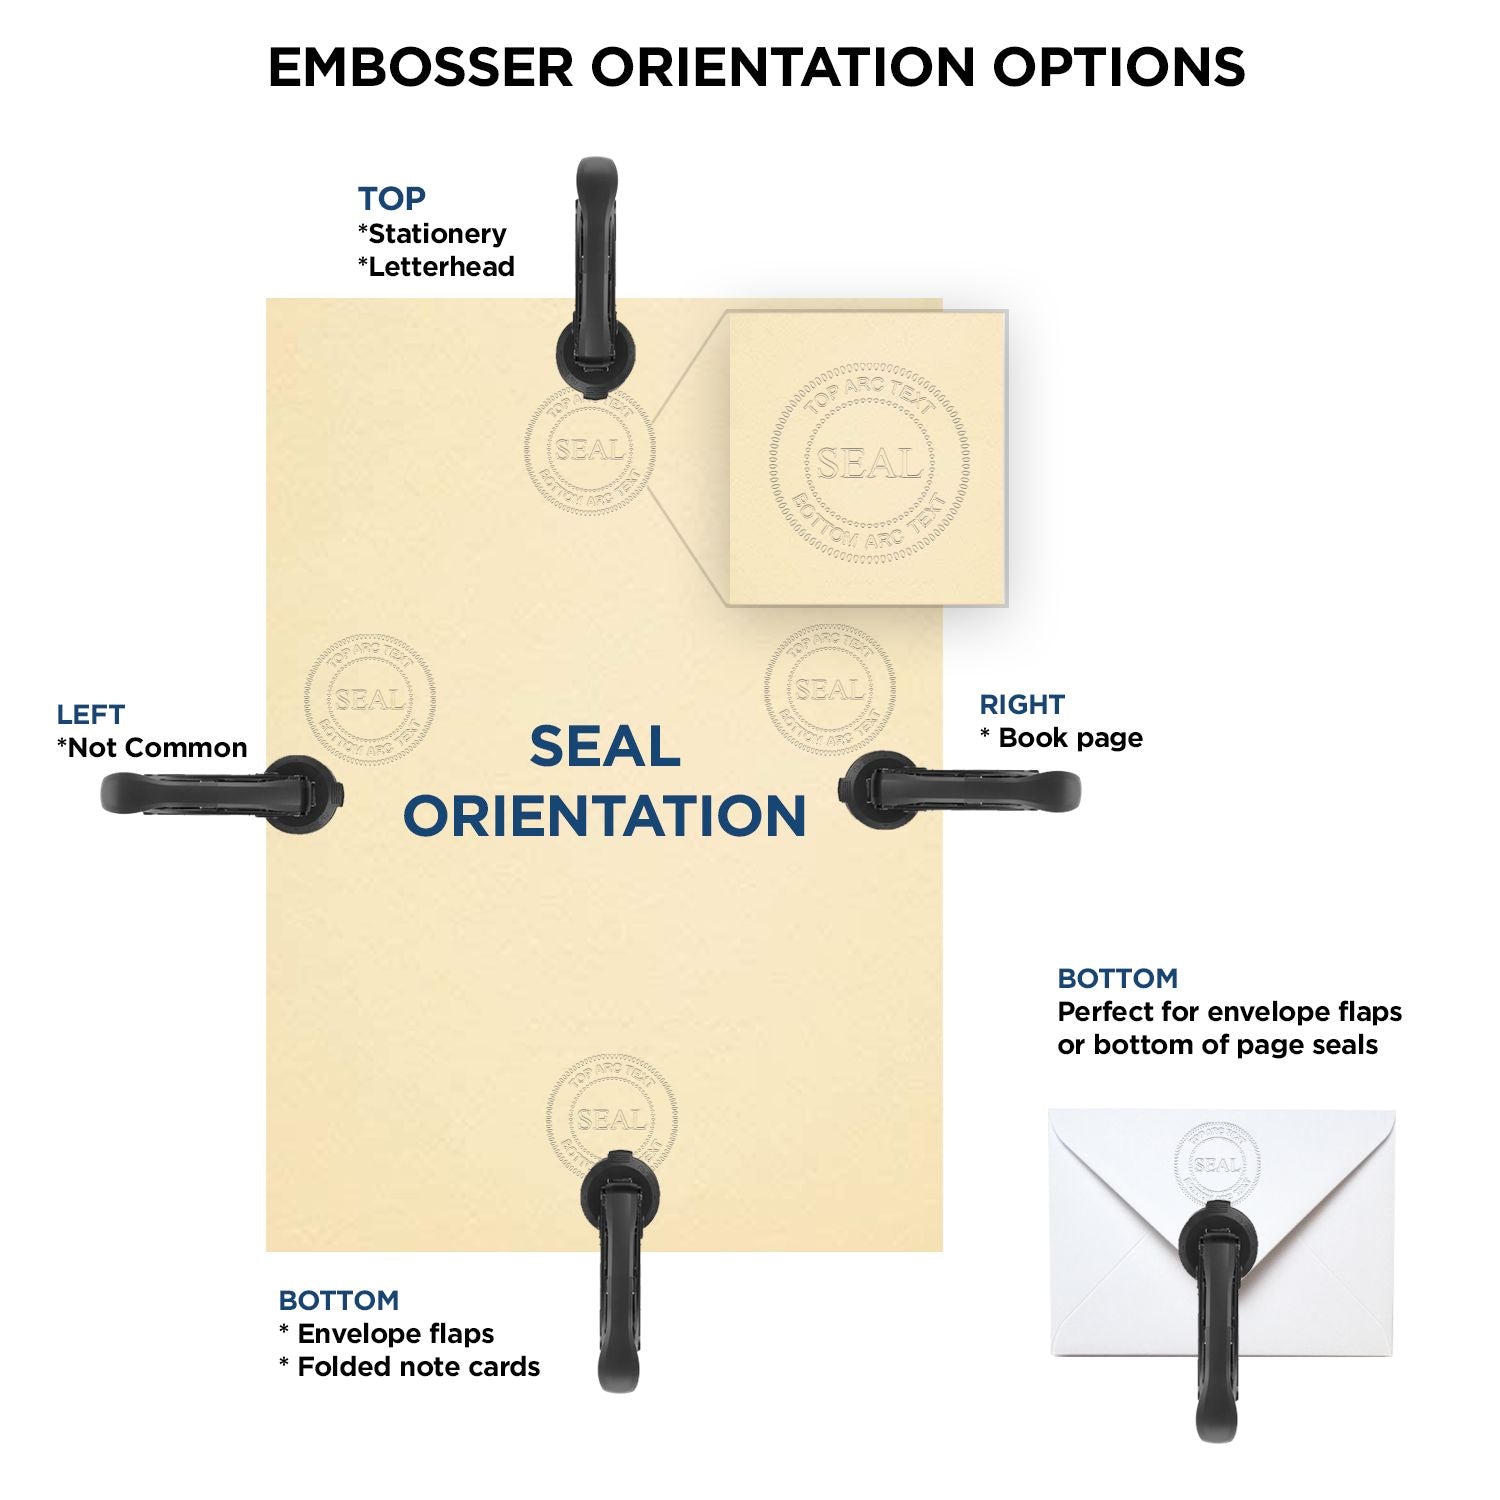 An infographic for the Iowa Engineer Desk Seal showing embosser orientation, this is showing examples of a top, bottom, right and left insert.